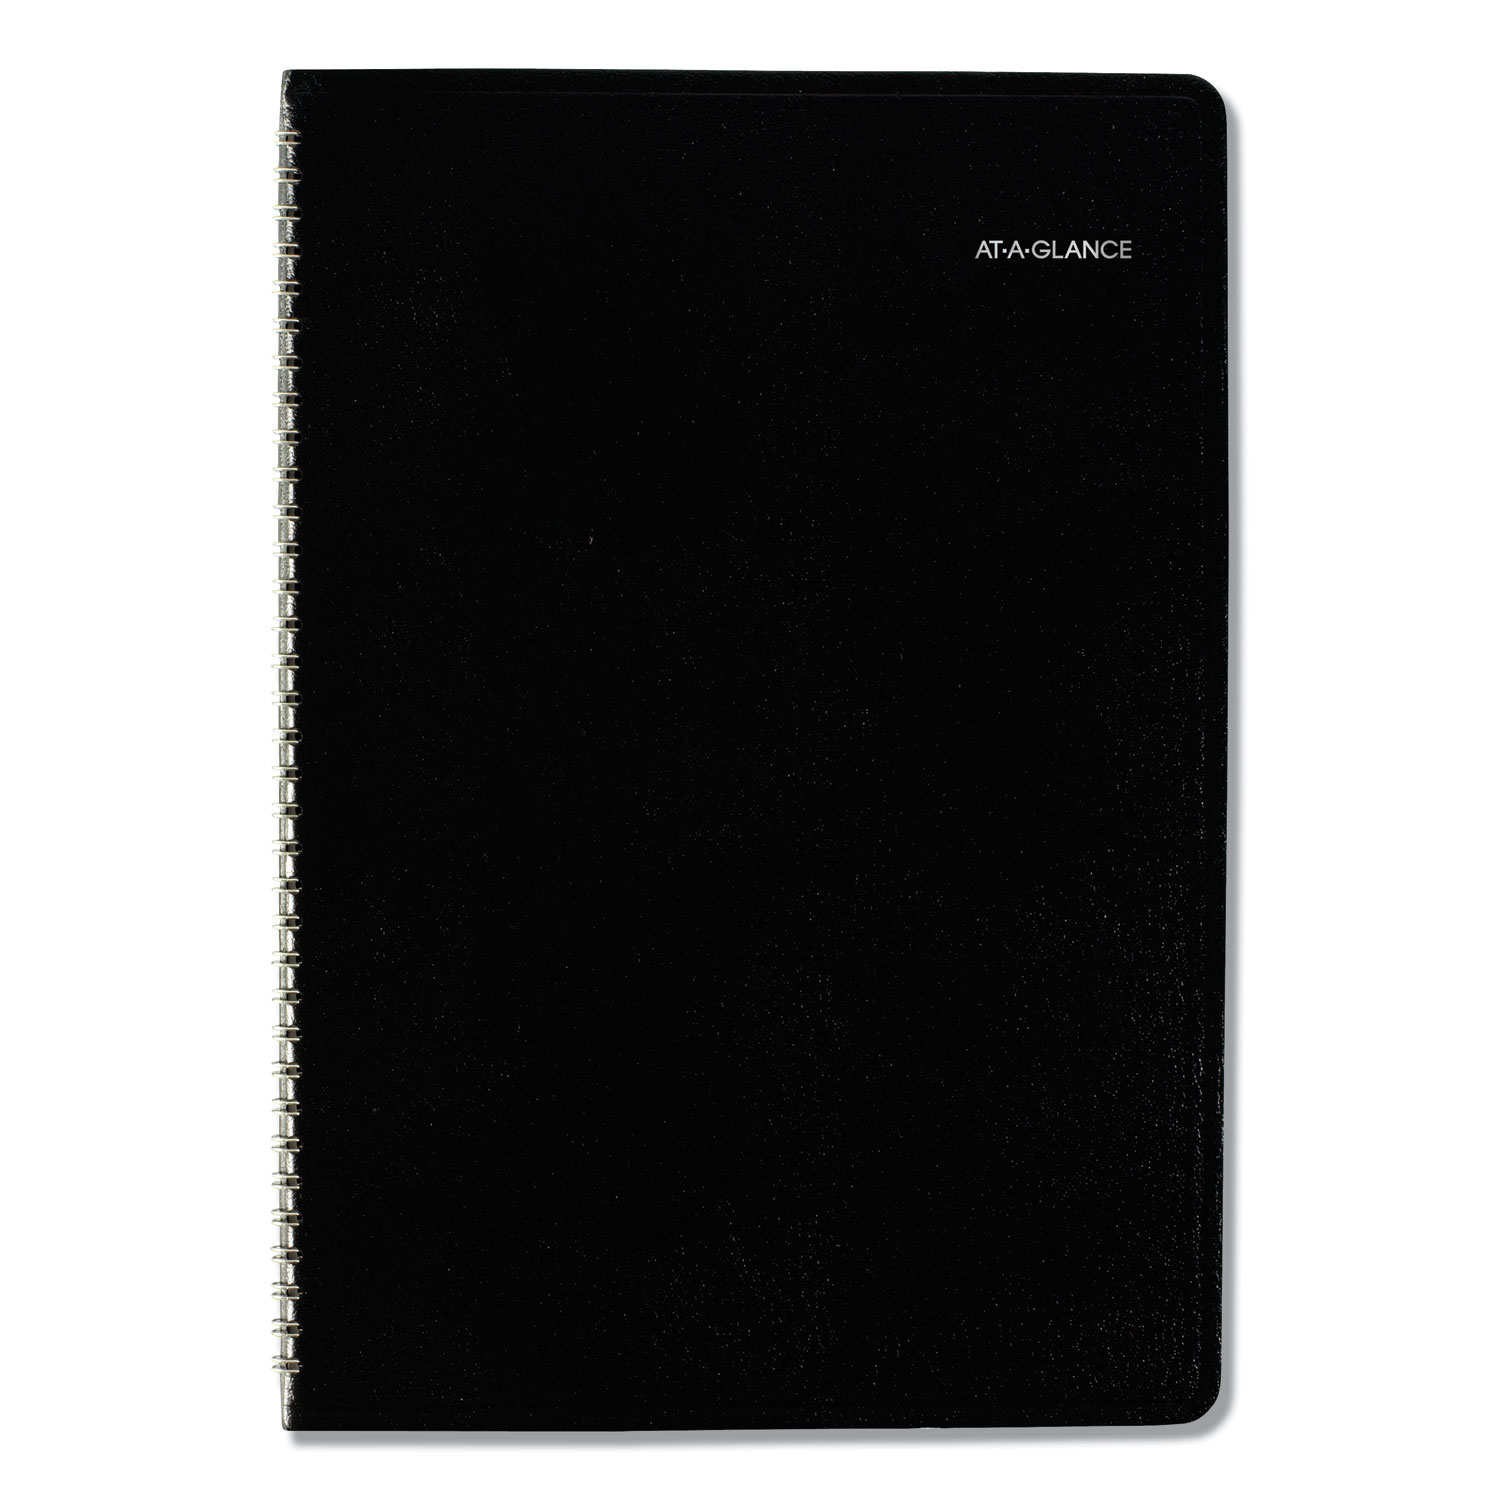 Monthly Planner, 12 x 8, Black Cover, 2020-2021